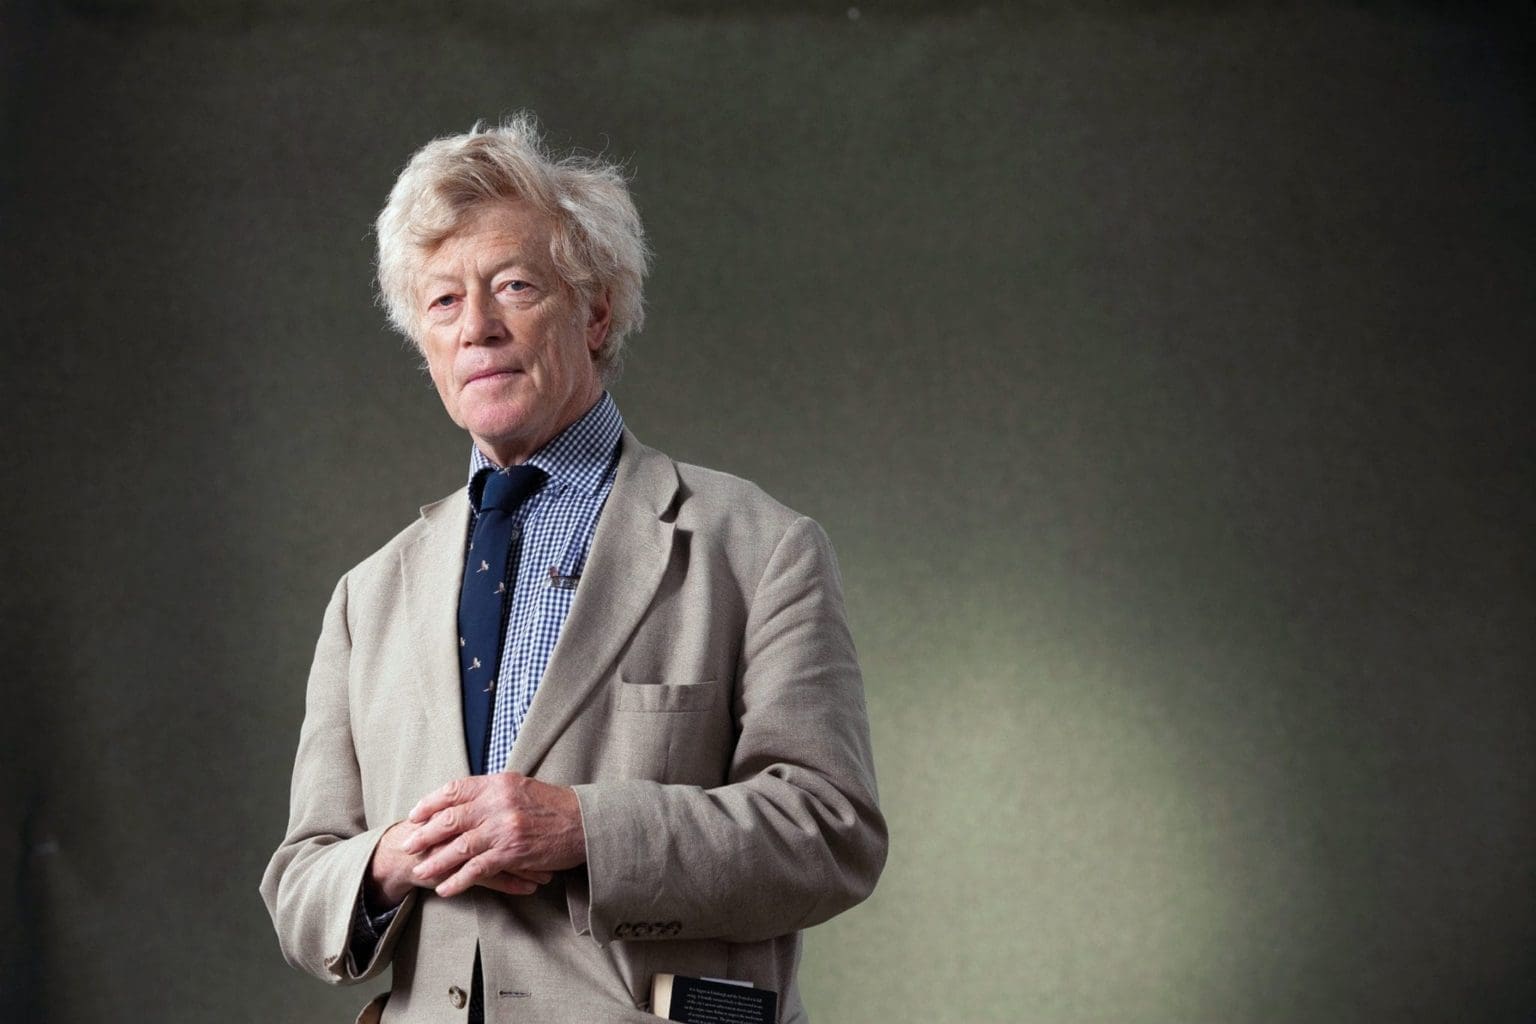 Roger Scruton’s Ideas of ‘Building Better, Building Beautiful’ Found Fertile Ground in Budapest